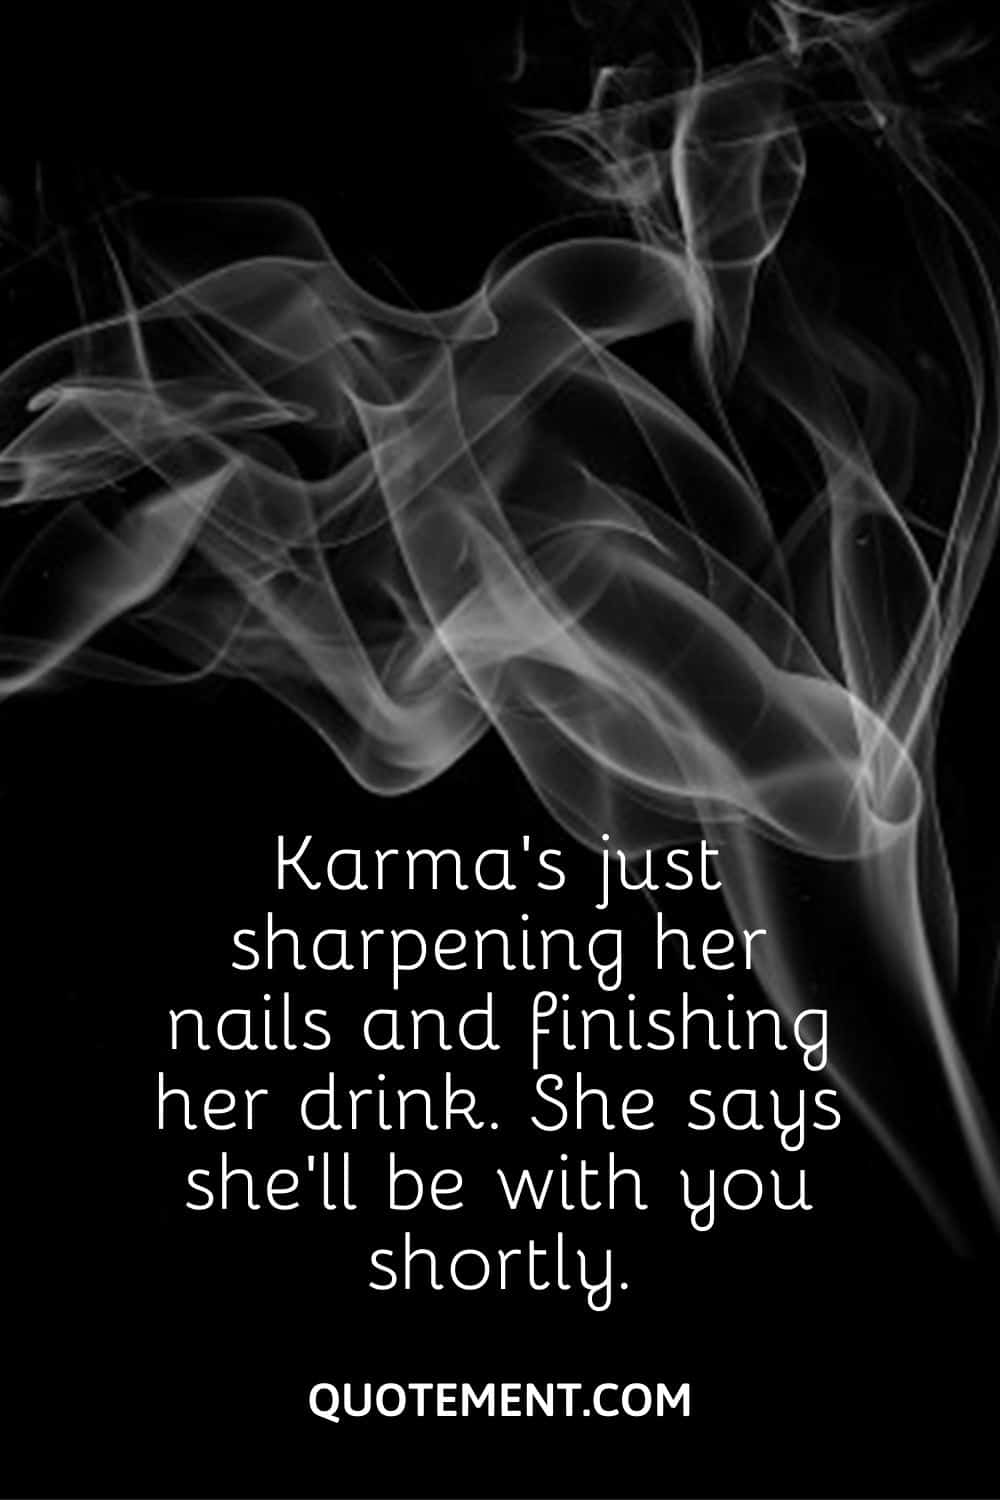 Karma’s just sharpening her nails and finishing her drink